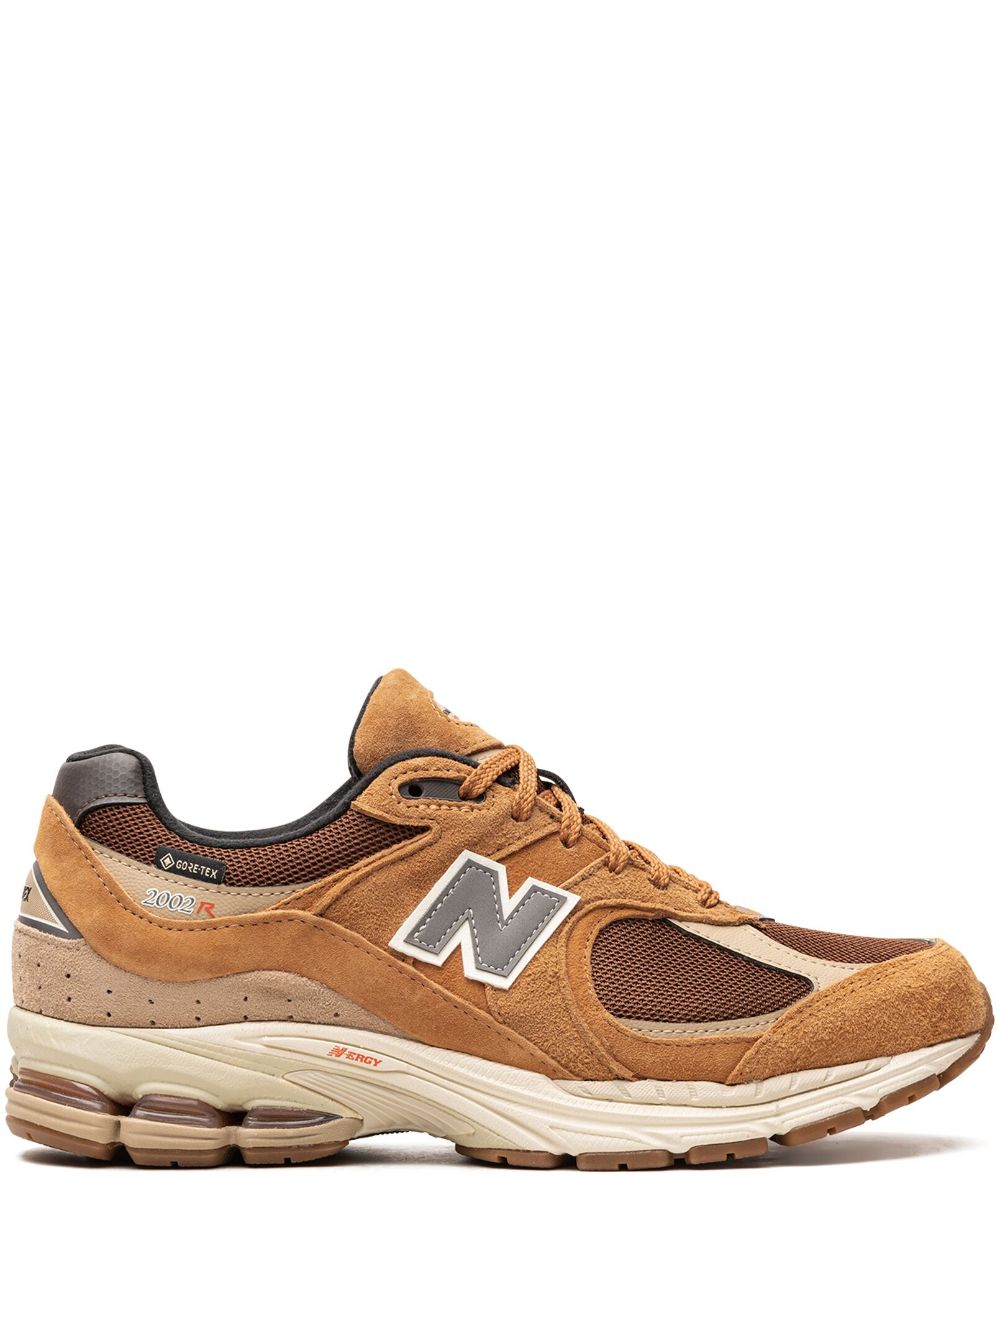 New Balance 2002RX low-top sneakers - Brown